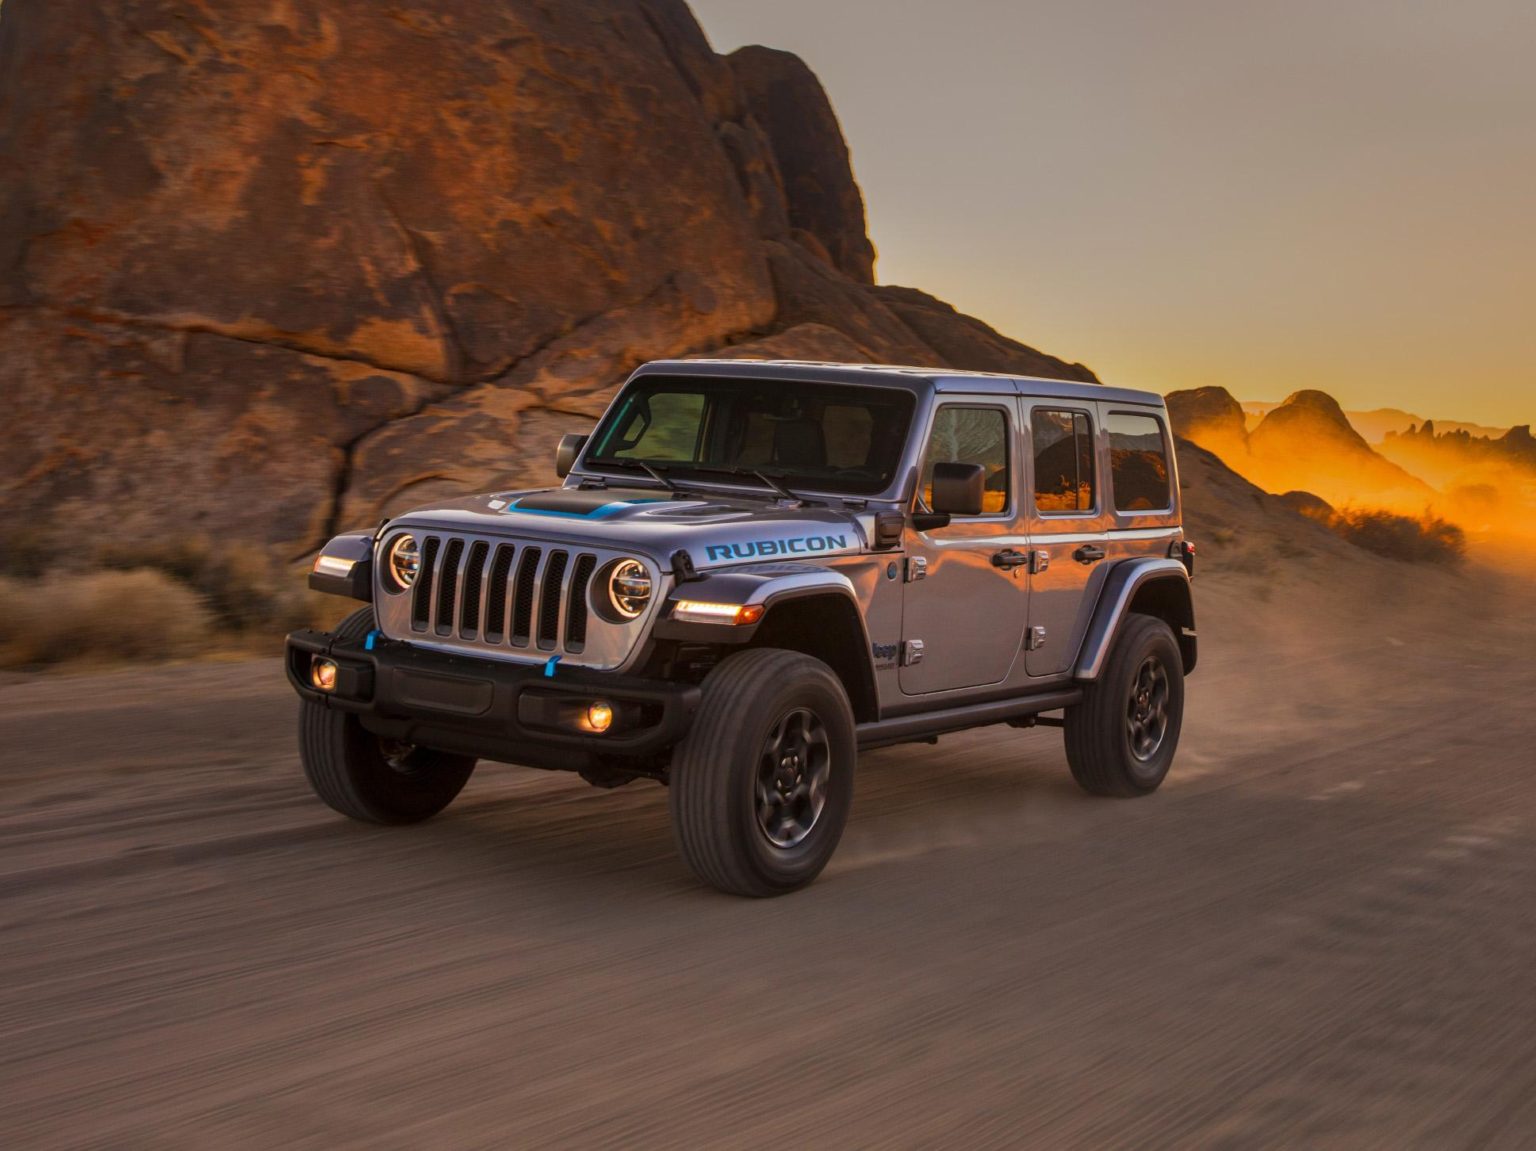 The 2021 Jeep Wrangler 4xe will arrive at dealerships in January